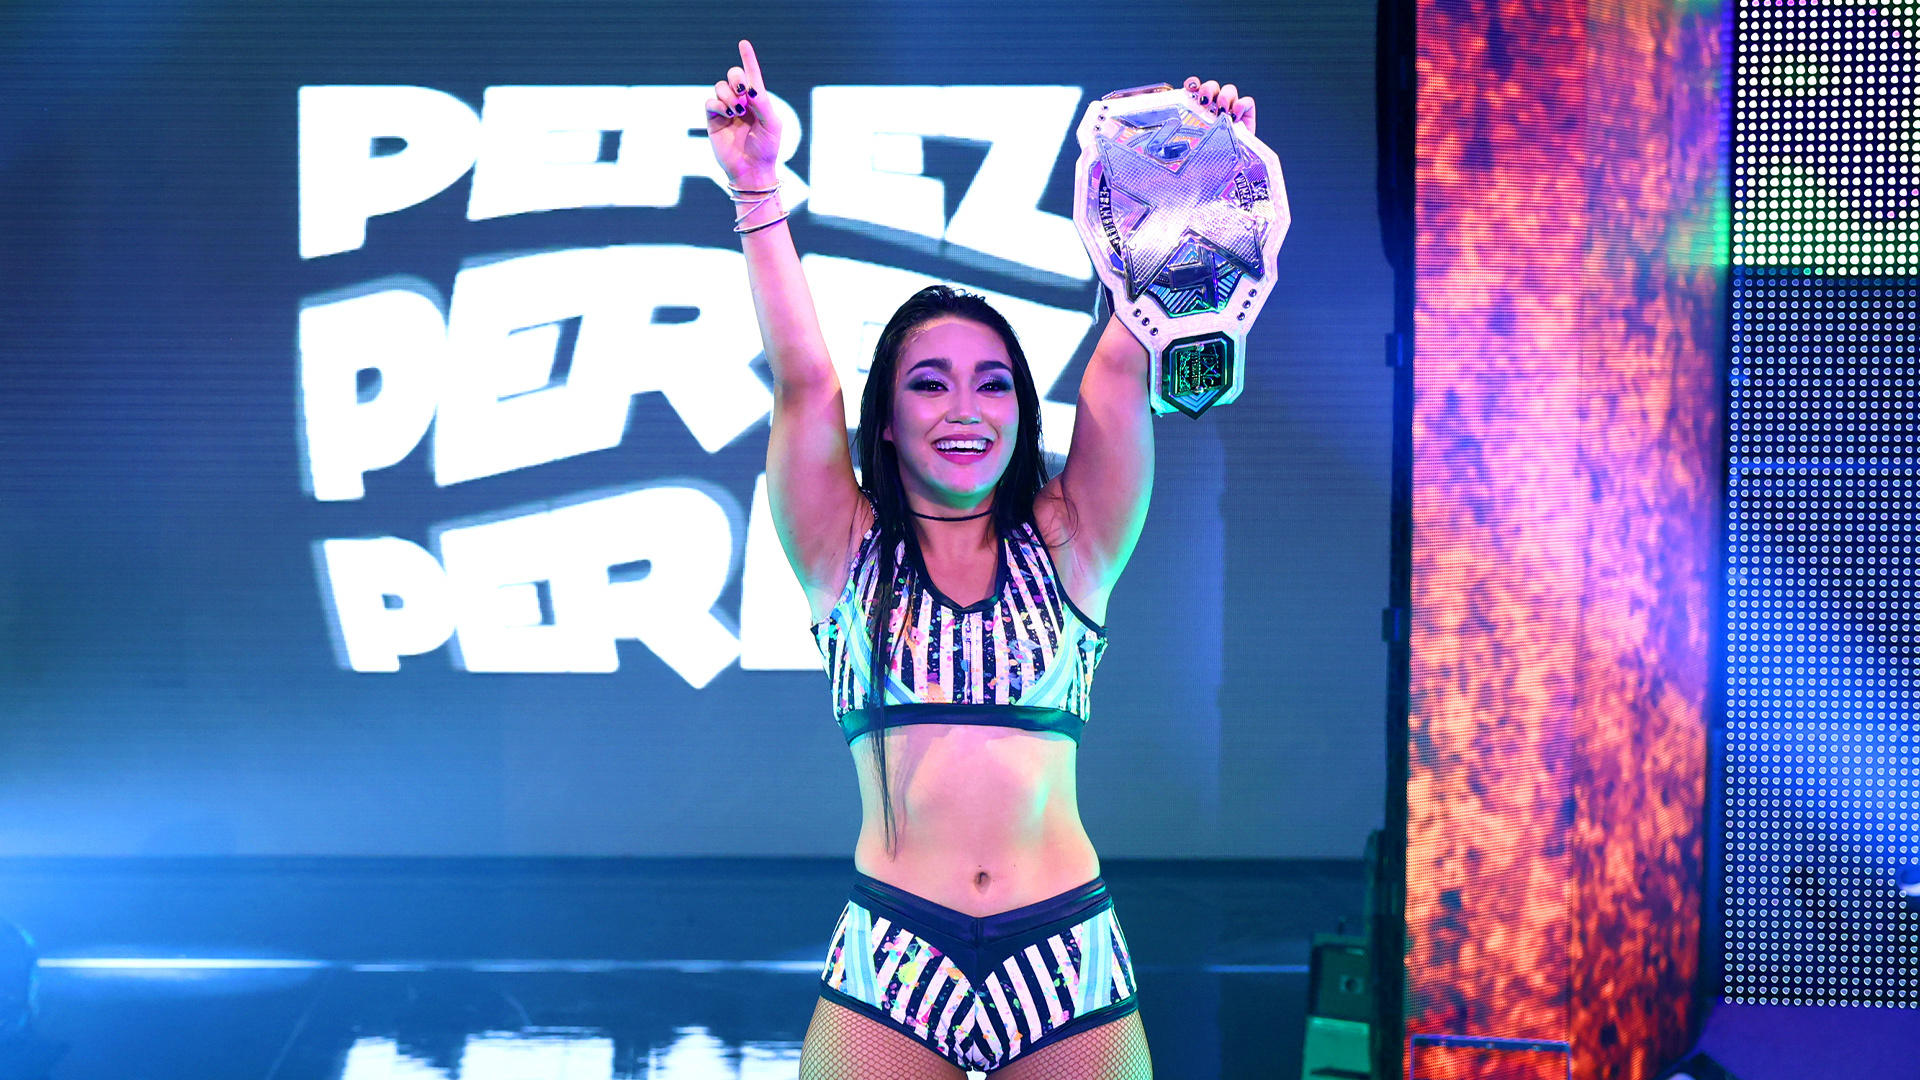 Roxanne Perez defeated Mandy Rose to win the Women's NXT Championship title